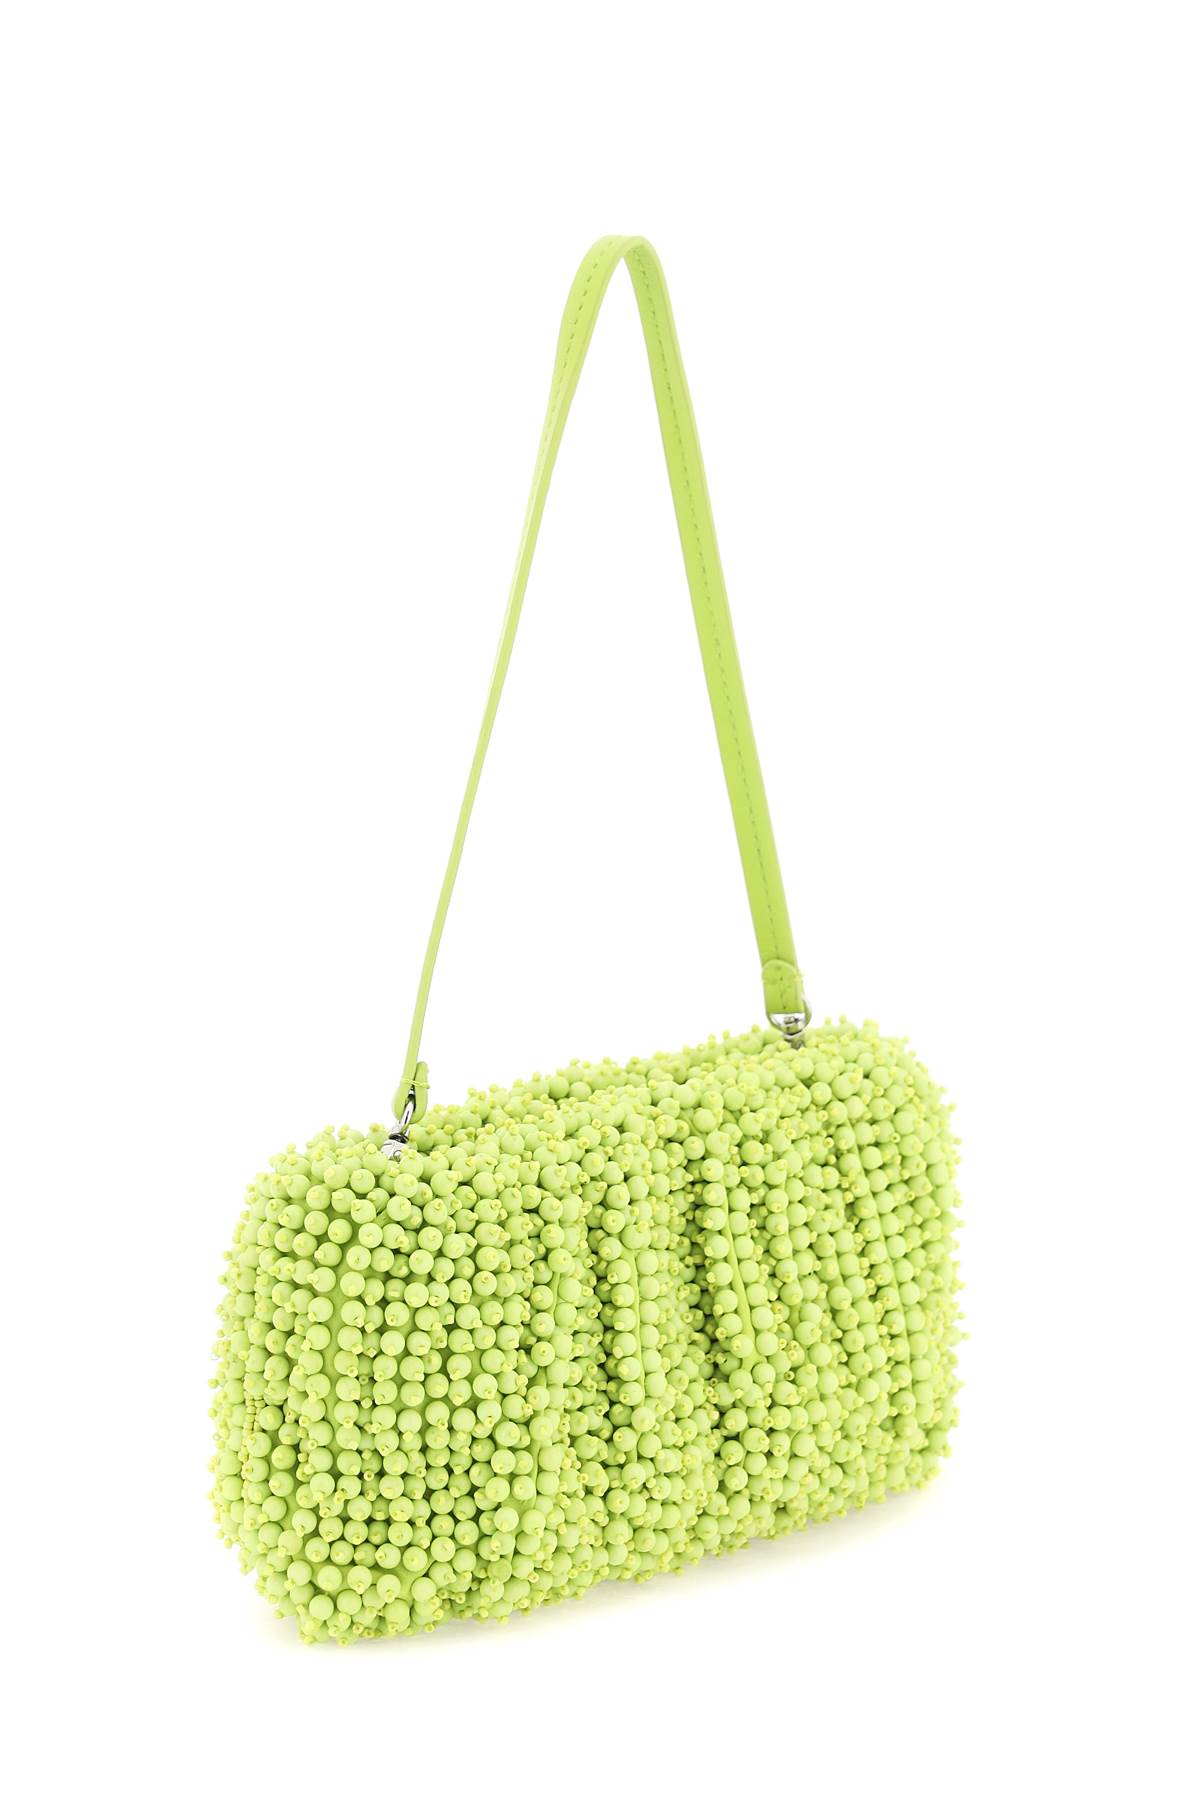 Citron Bean Convertible Bag by Staud Accessories for $20